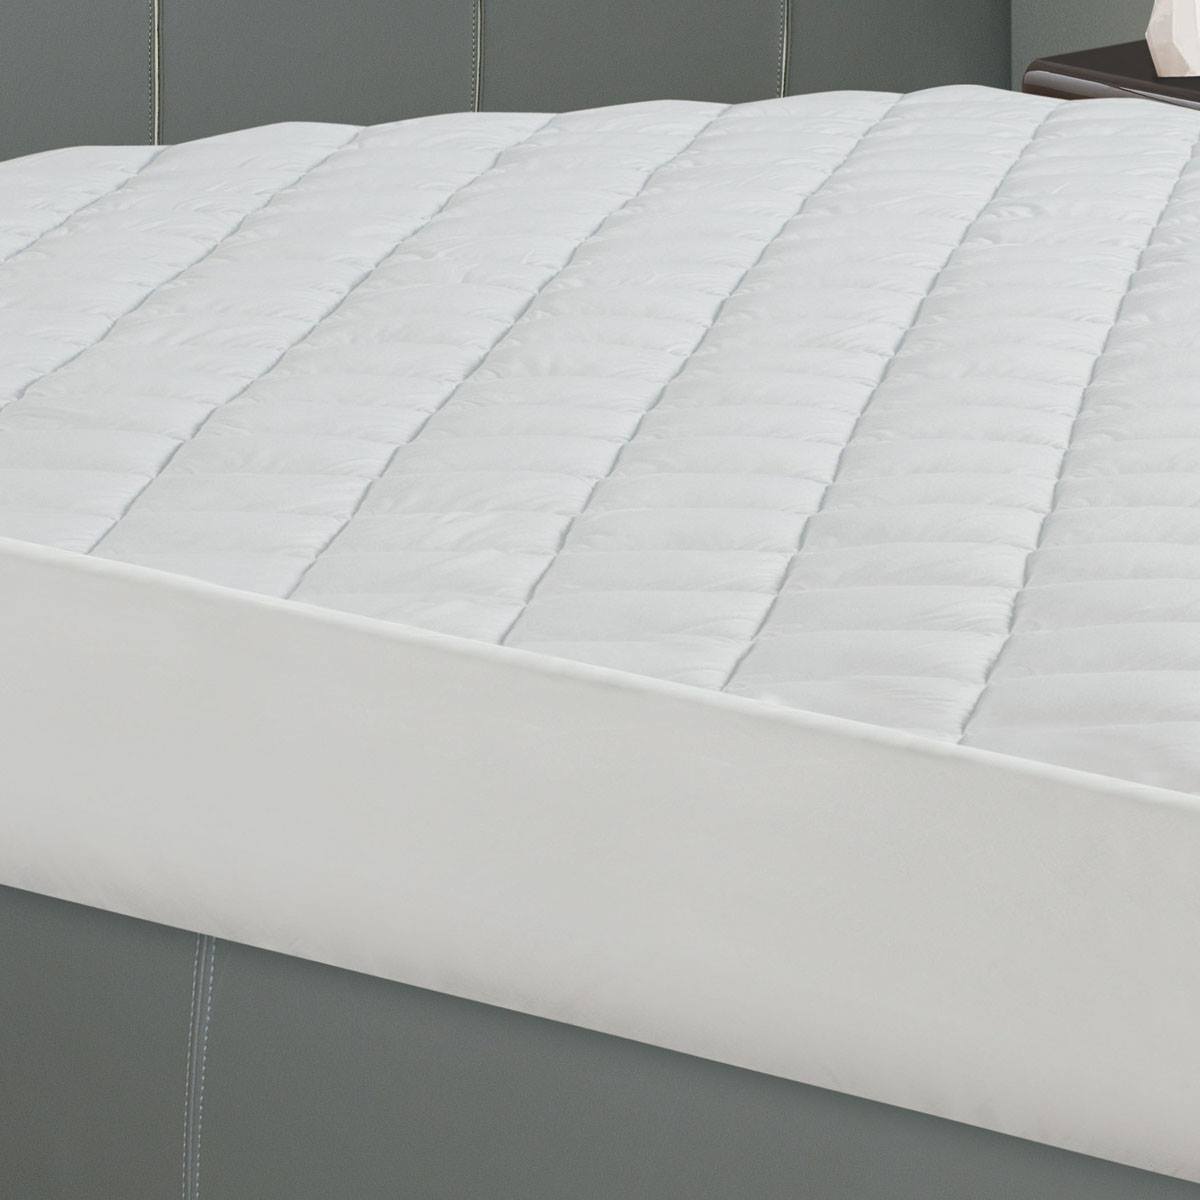 All-In-One Ultra-Fresh(tm) Treatment Fitted Mattress Pad